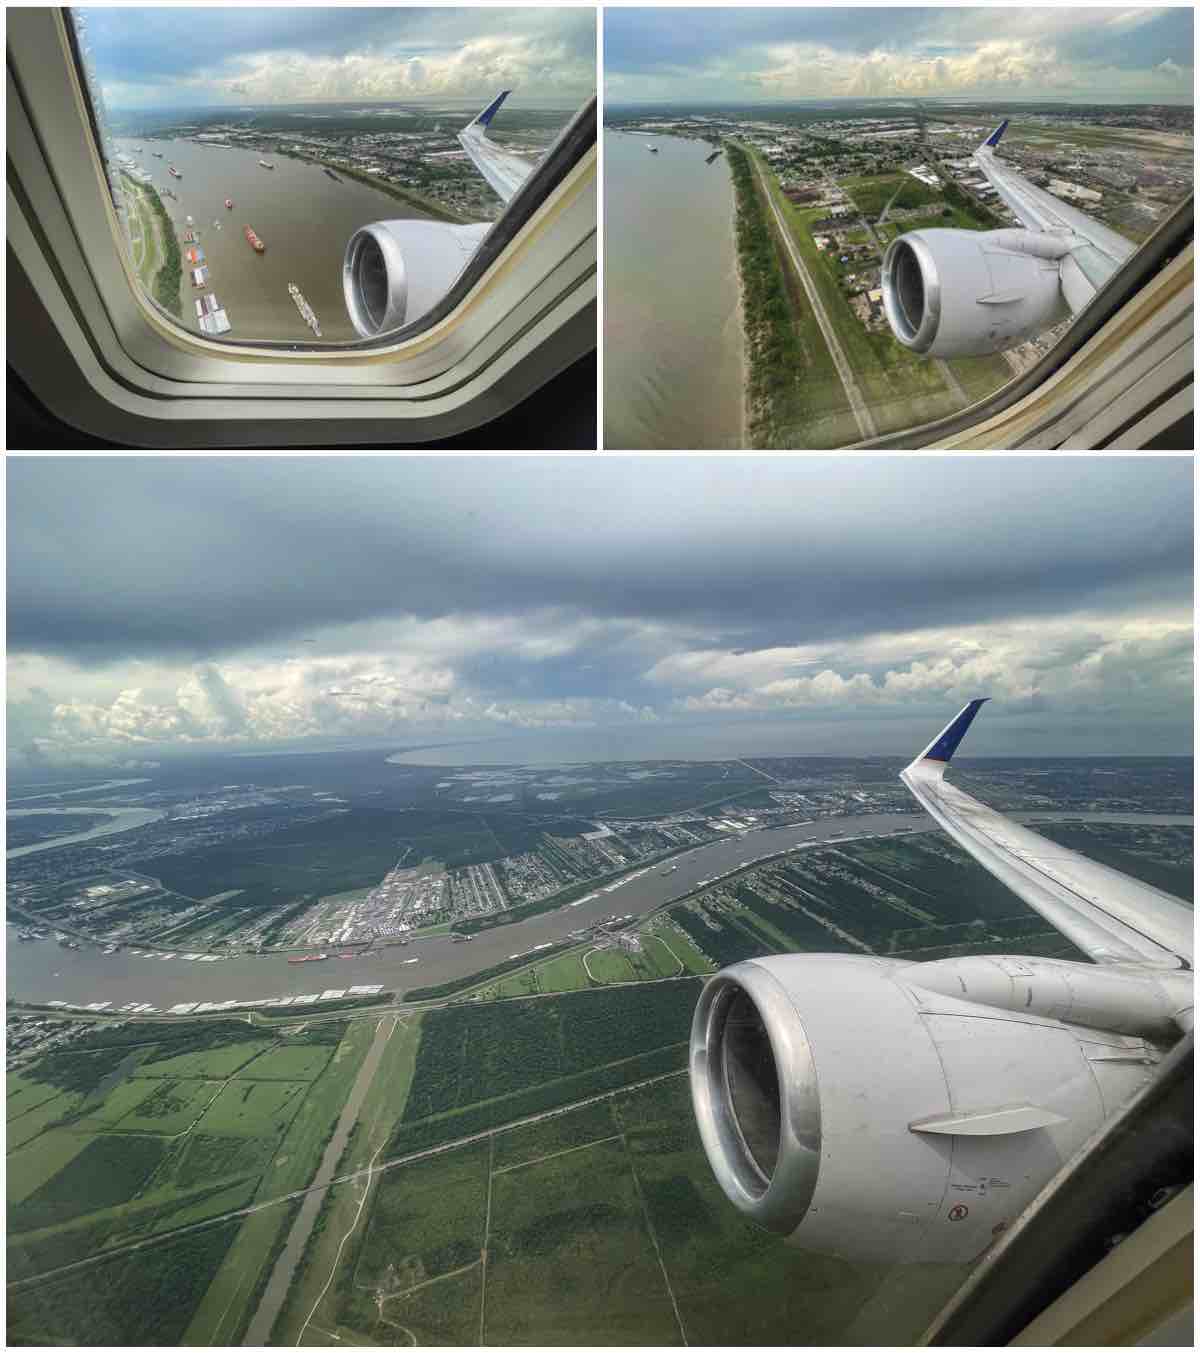 View of scenery after takeoff from MSY airport 